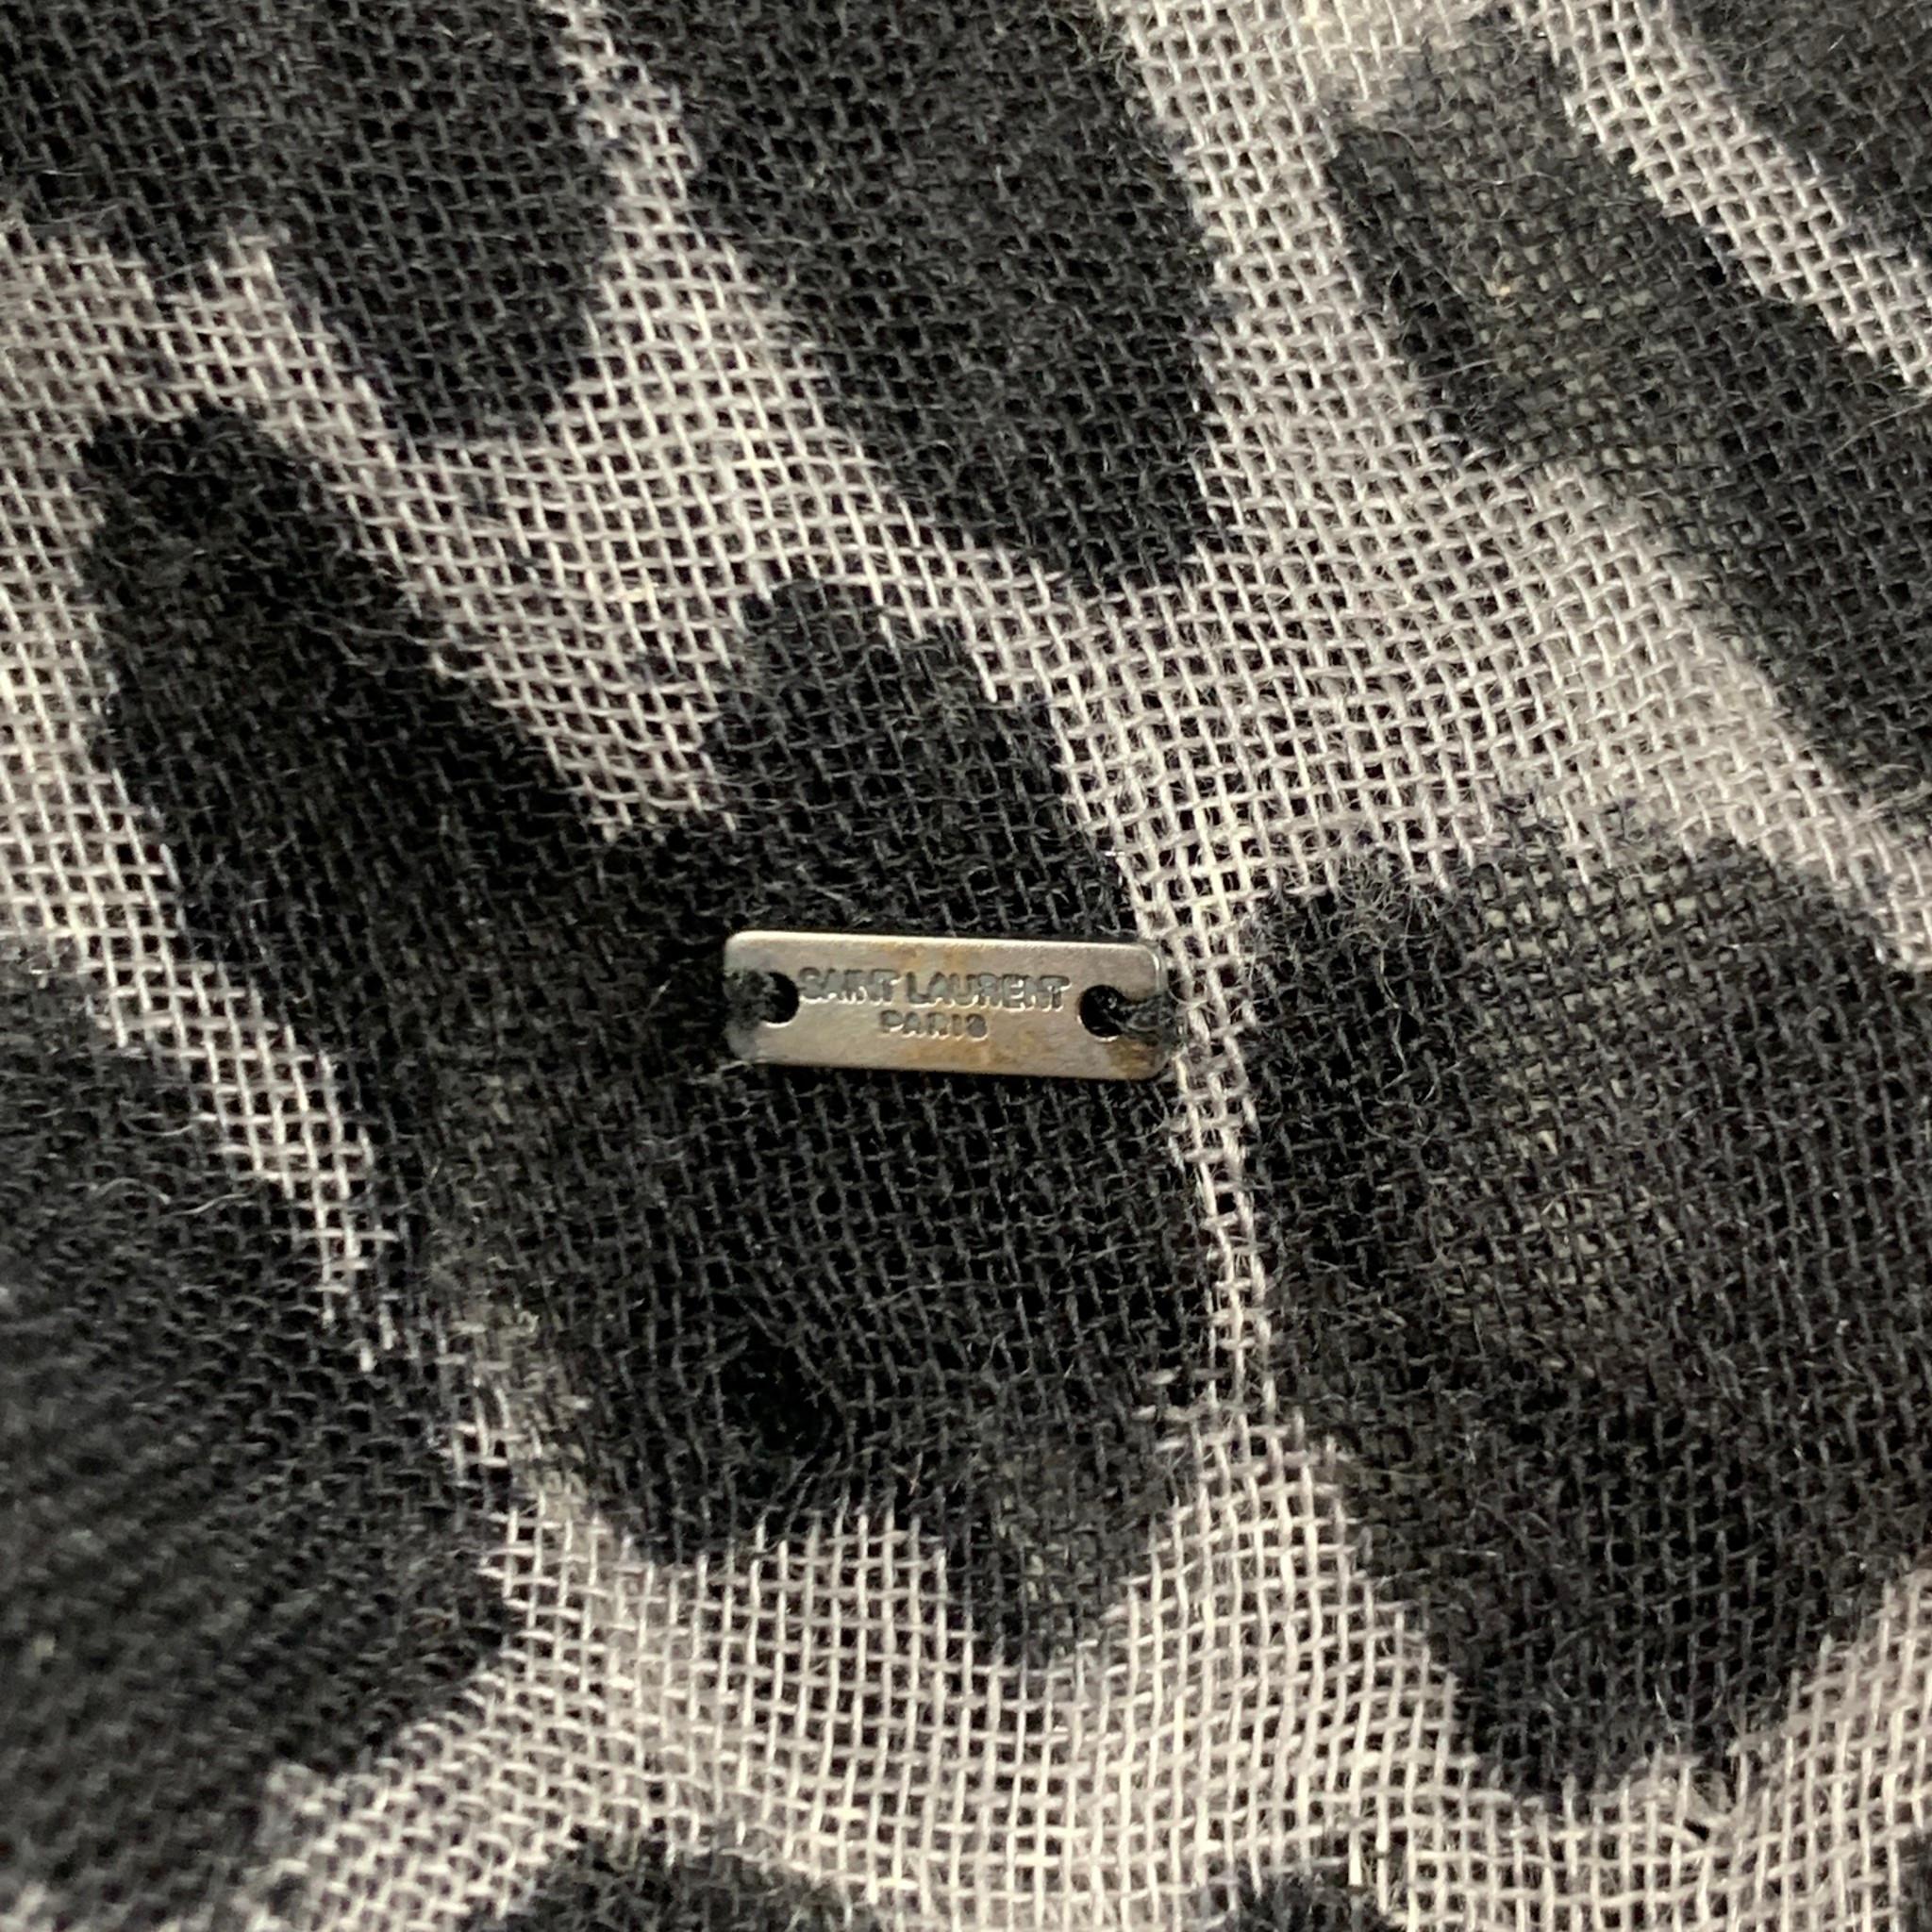 YVES SAINT LAURENT scarf comes in a black & white animal print material with a fringe trim. Made in Italy. 

Very Good Pre-Owned Condition.

Measurements:

54 in. x 52 in.